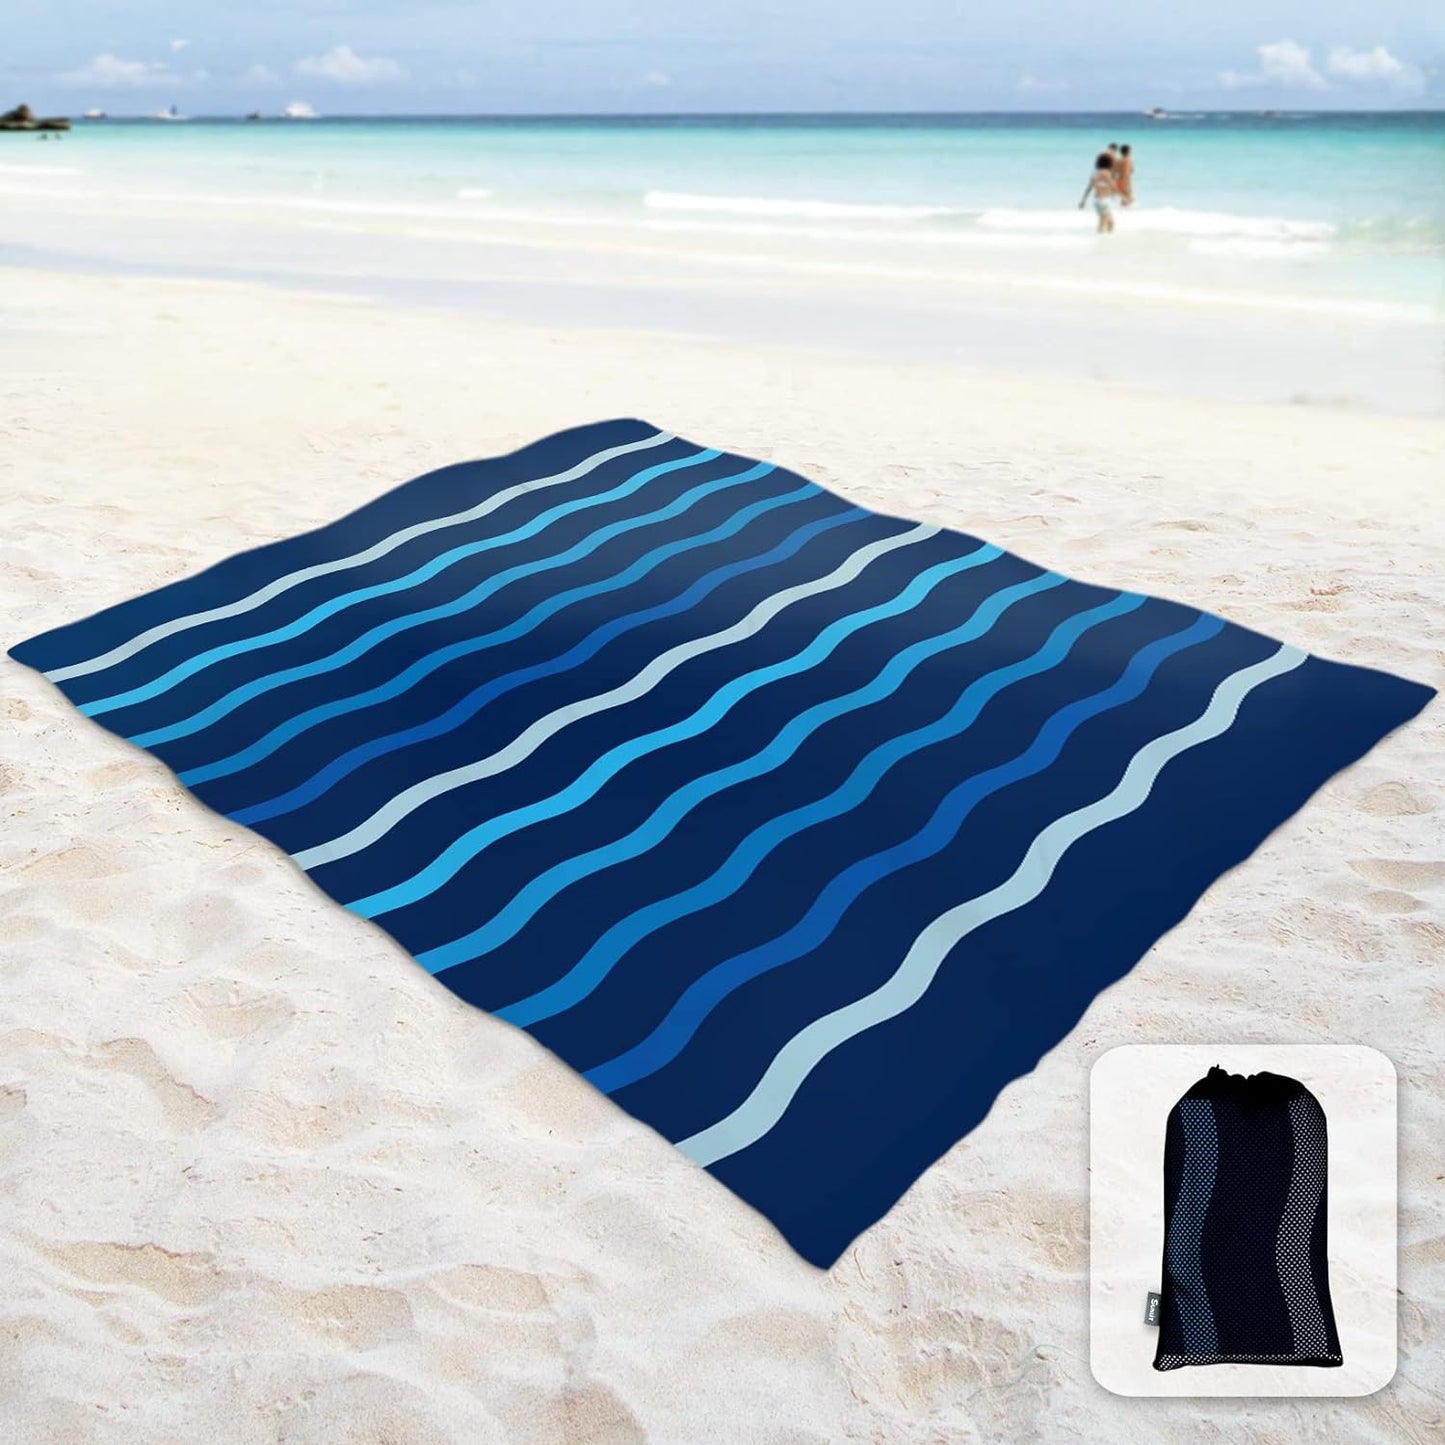 Sunlit Silky Soft Sand Proof Beach Blanket 106"x81" / 85"x72" Sand Proof Mat with Corner Pockets and Mesh Bag for Beach Party, Travel, Camping and Outdoor Music Festival, Navy Blue Wave Curve